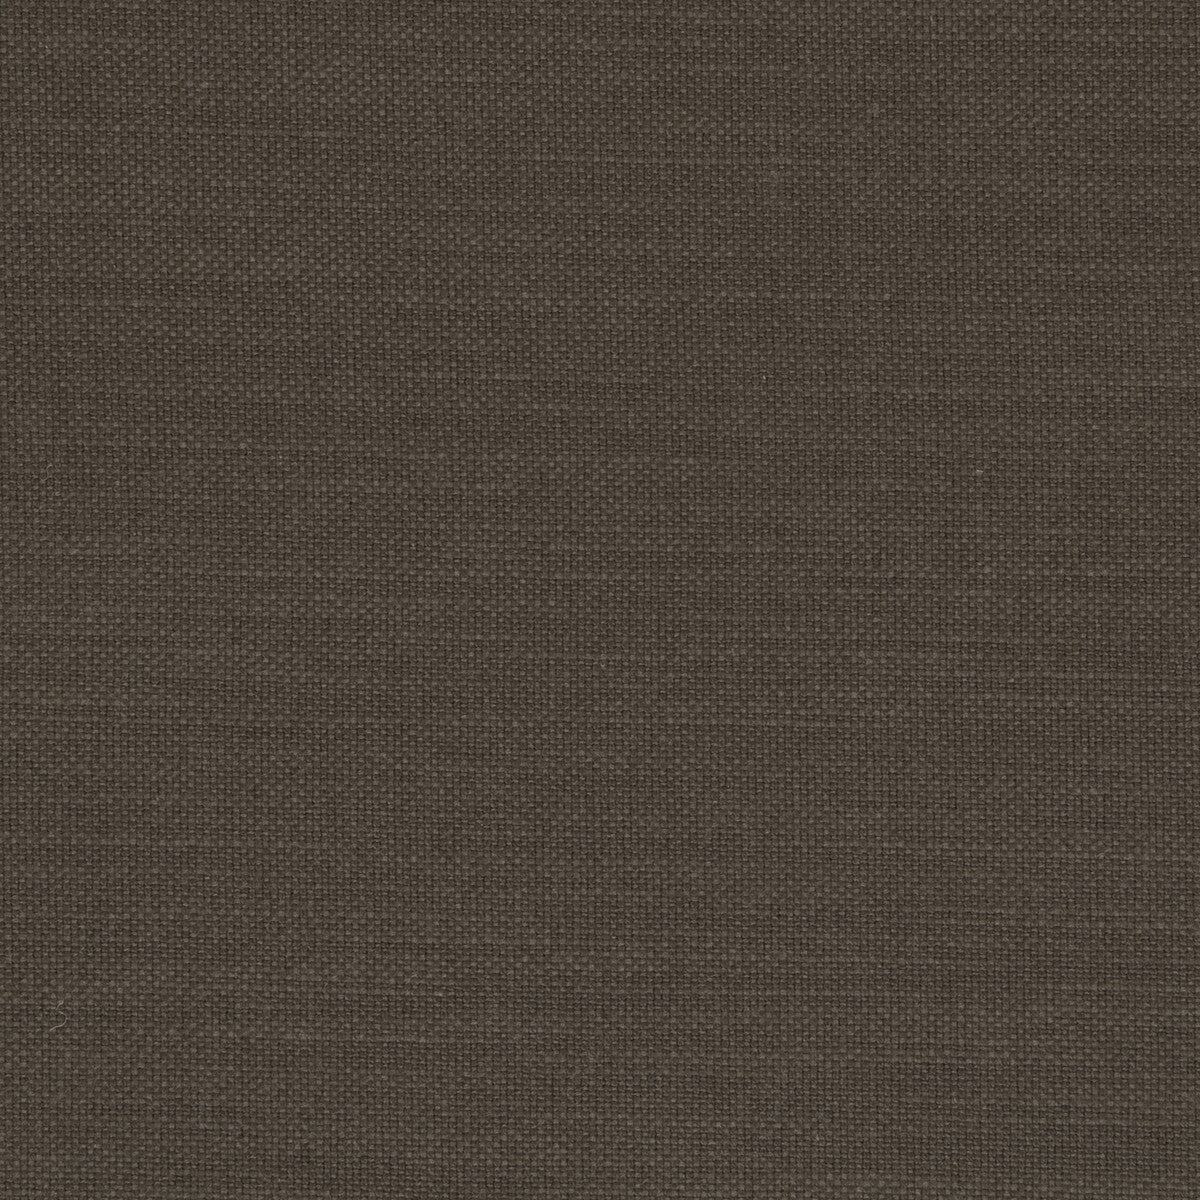 Nantucket fabric in espresso color - pattern F0594/18.CAC.0 - by Clarke And Clarke in the Clarke &amp; Clarke Nantucket collection